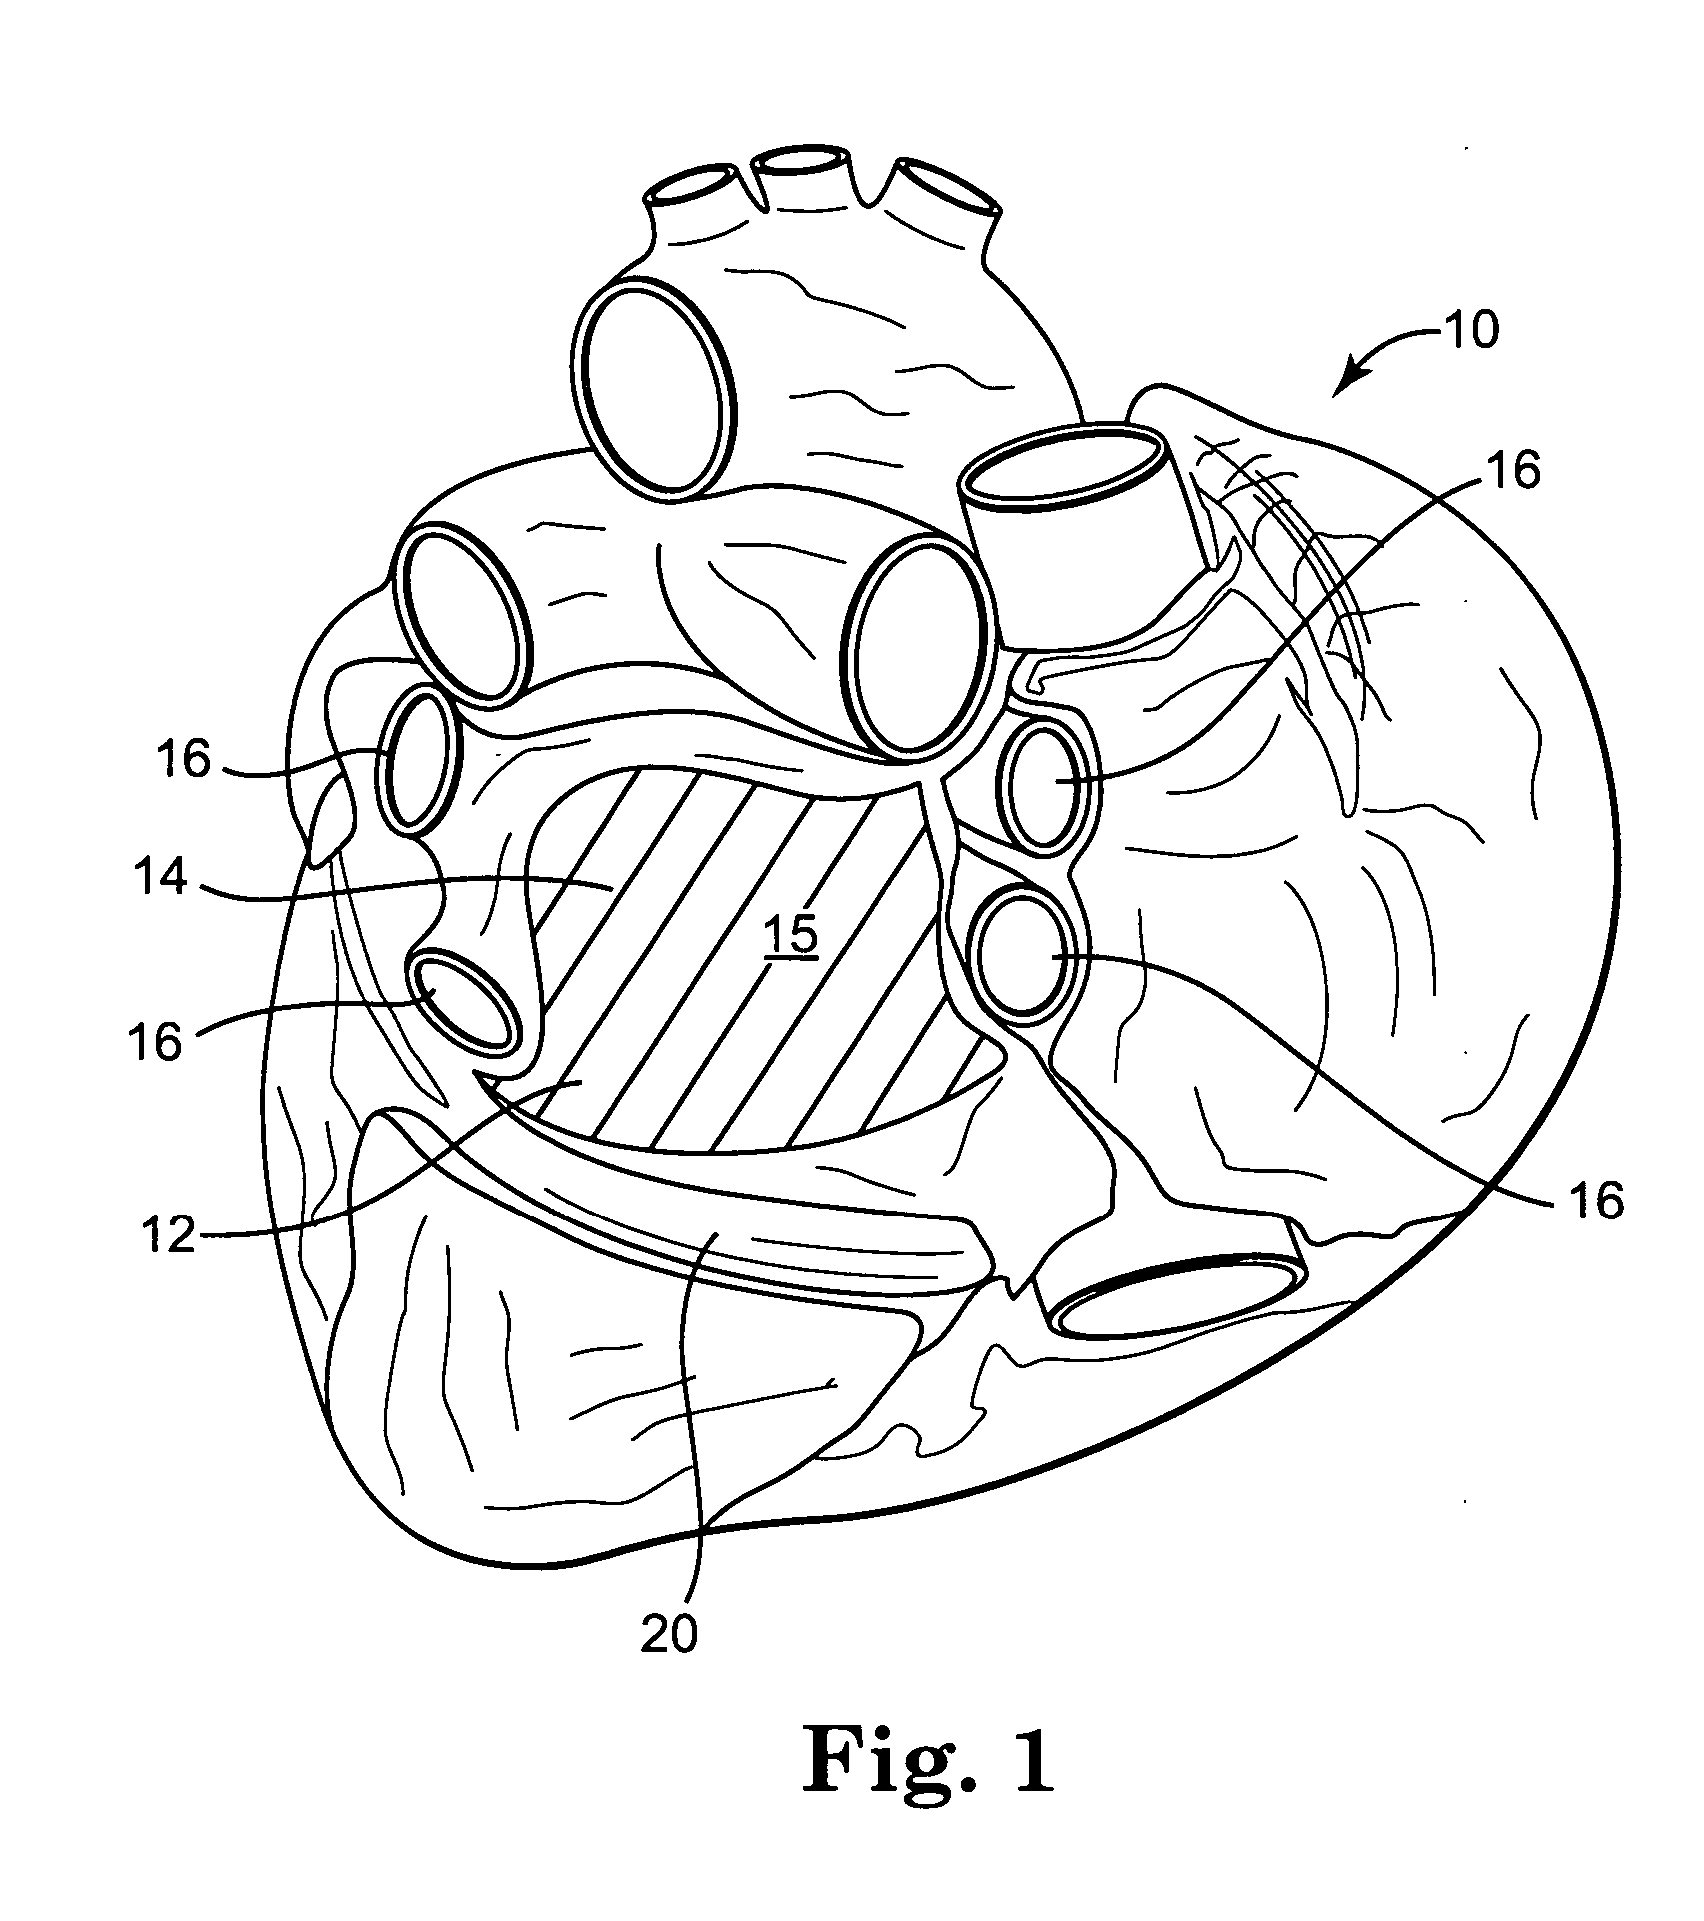 Method and devices for treating atrial fibrillation by mass ablation